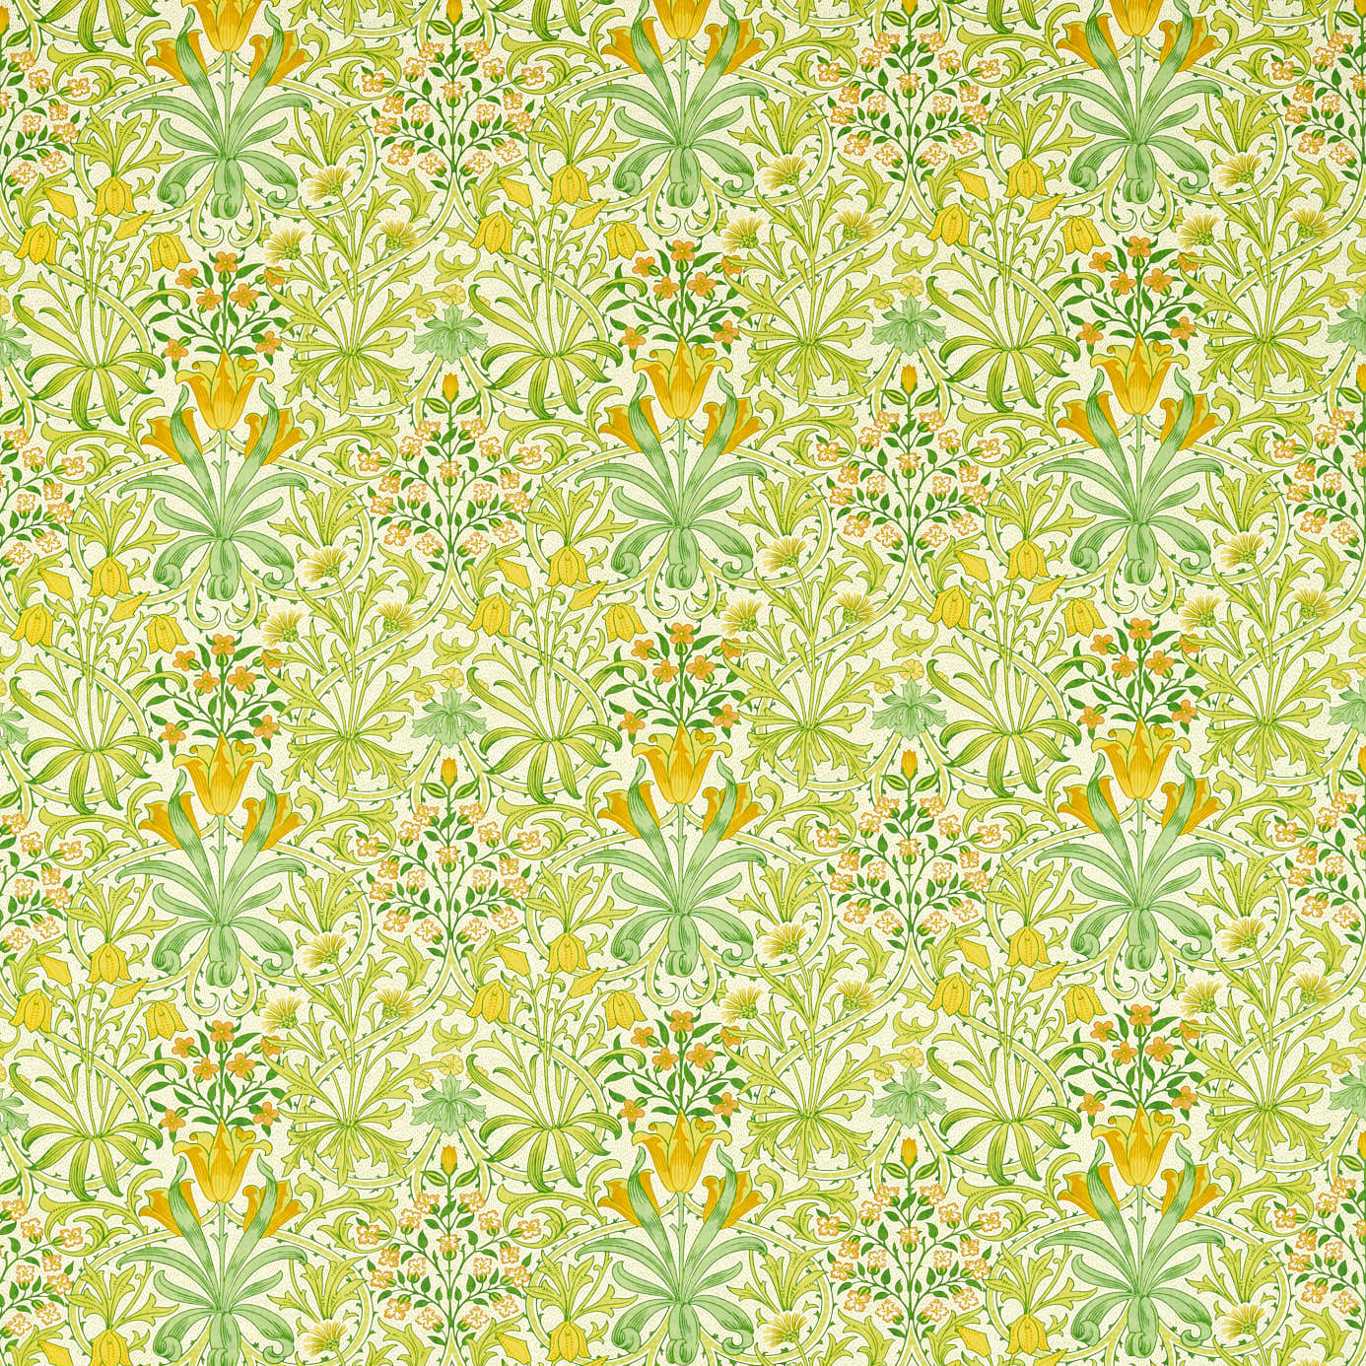 Woodland Weeds Fabric by Morris & Co.